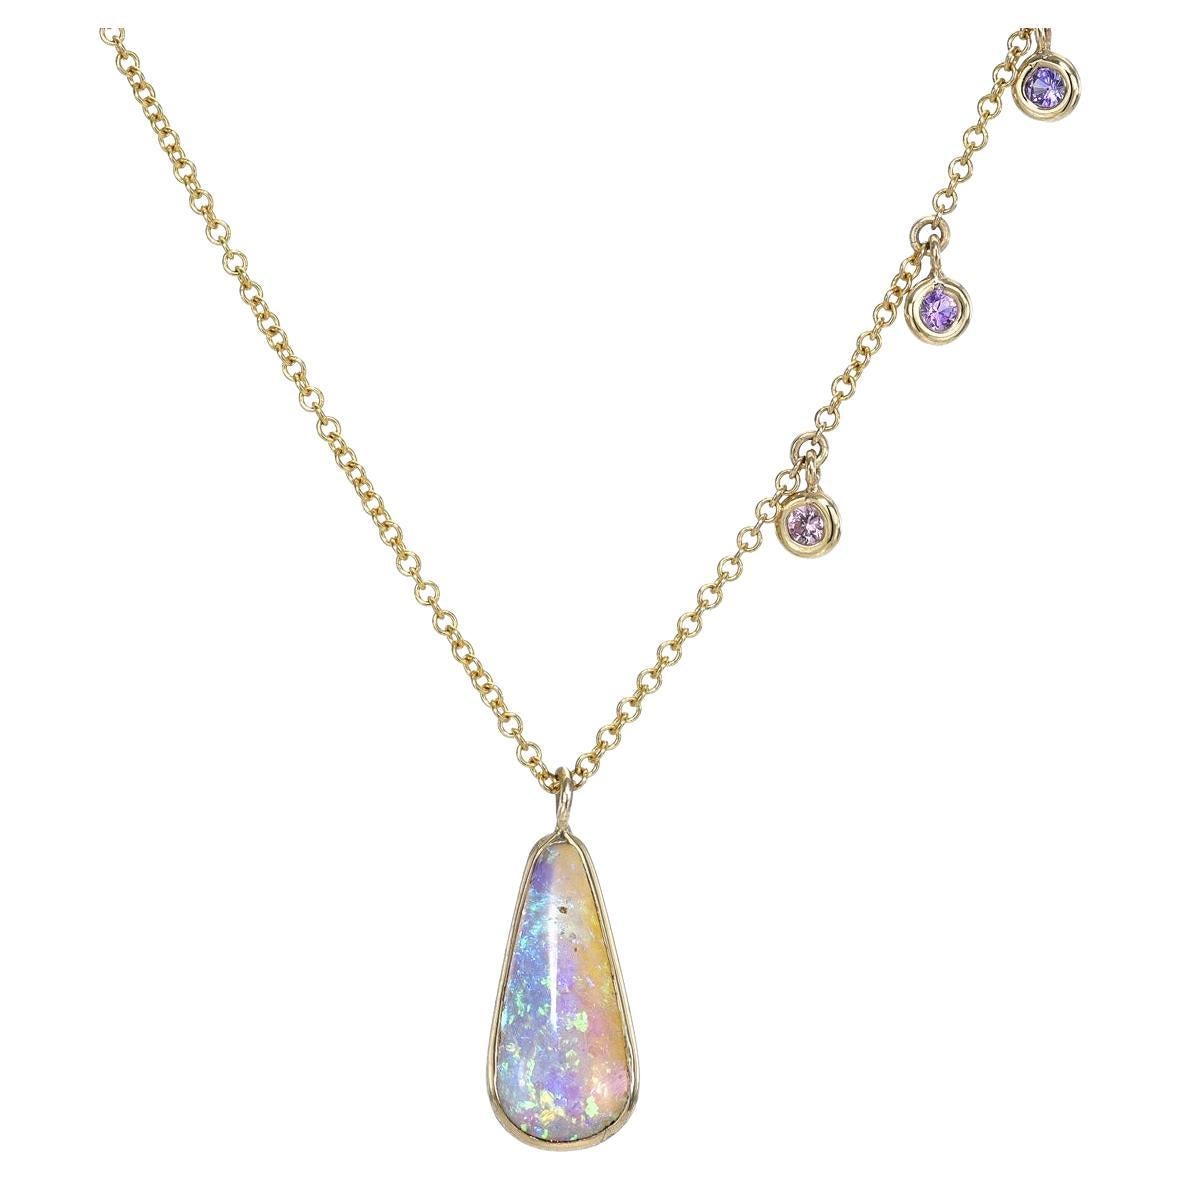 NIXIN Jewelry Dawn's Light Australian Opal Necklace with Sapphires in Rose Gold